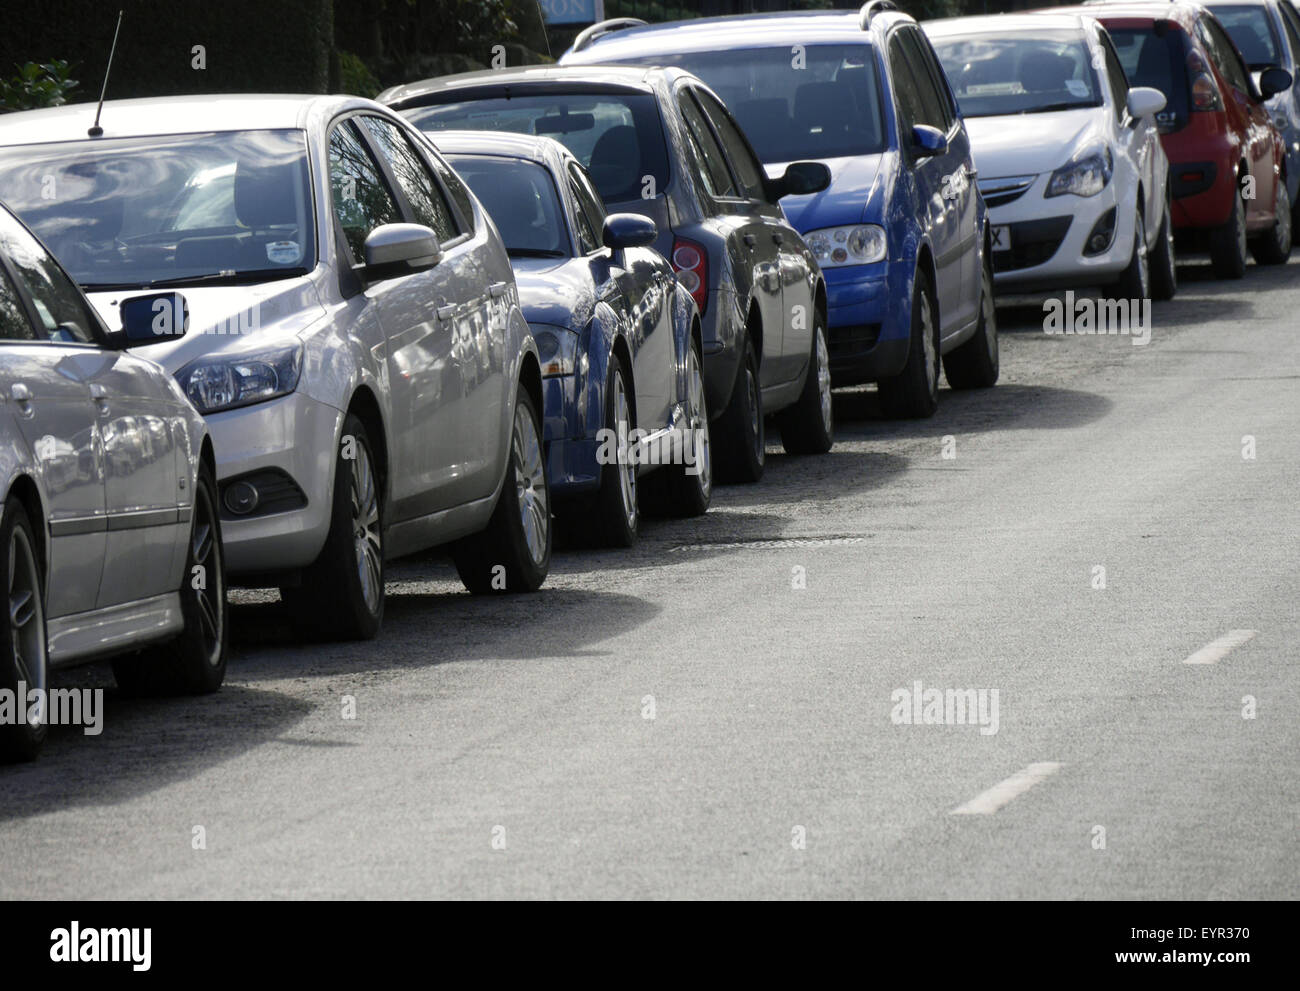 Long row of cars parked on city centre road Stock Photo